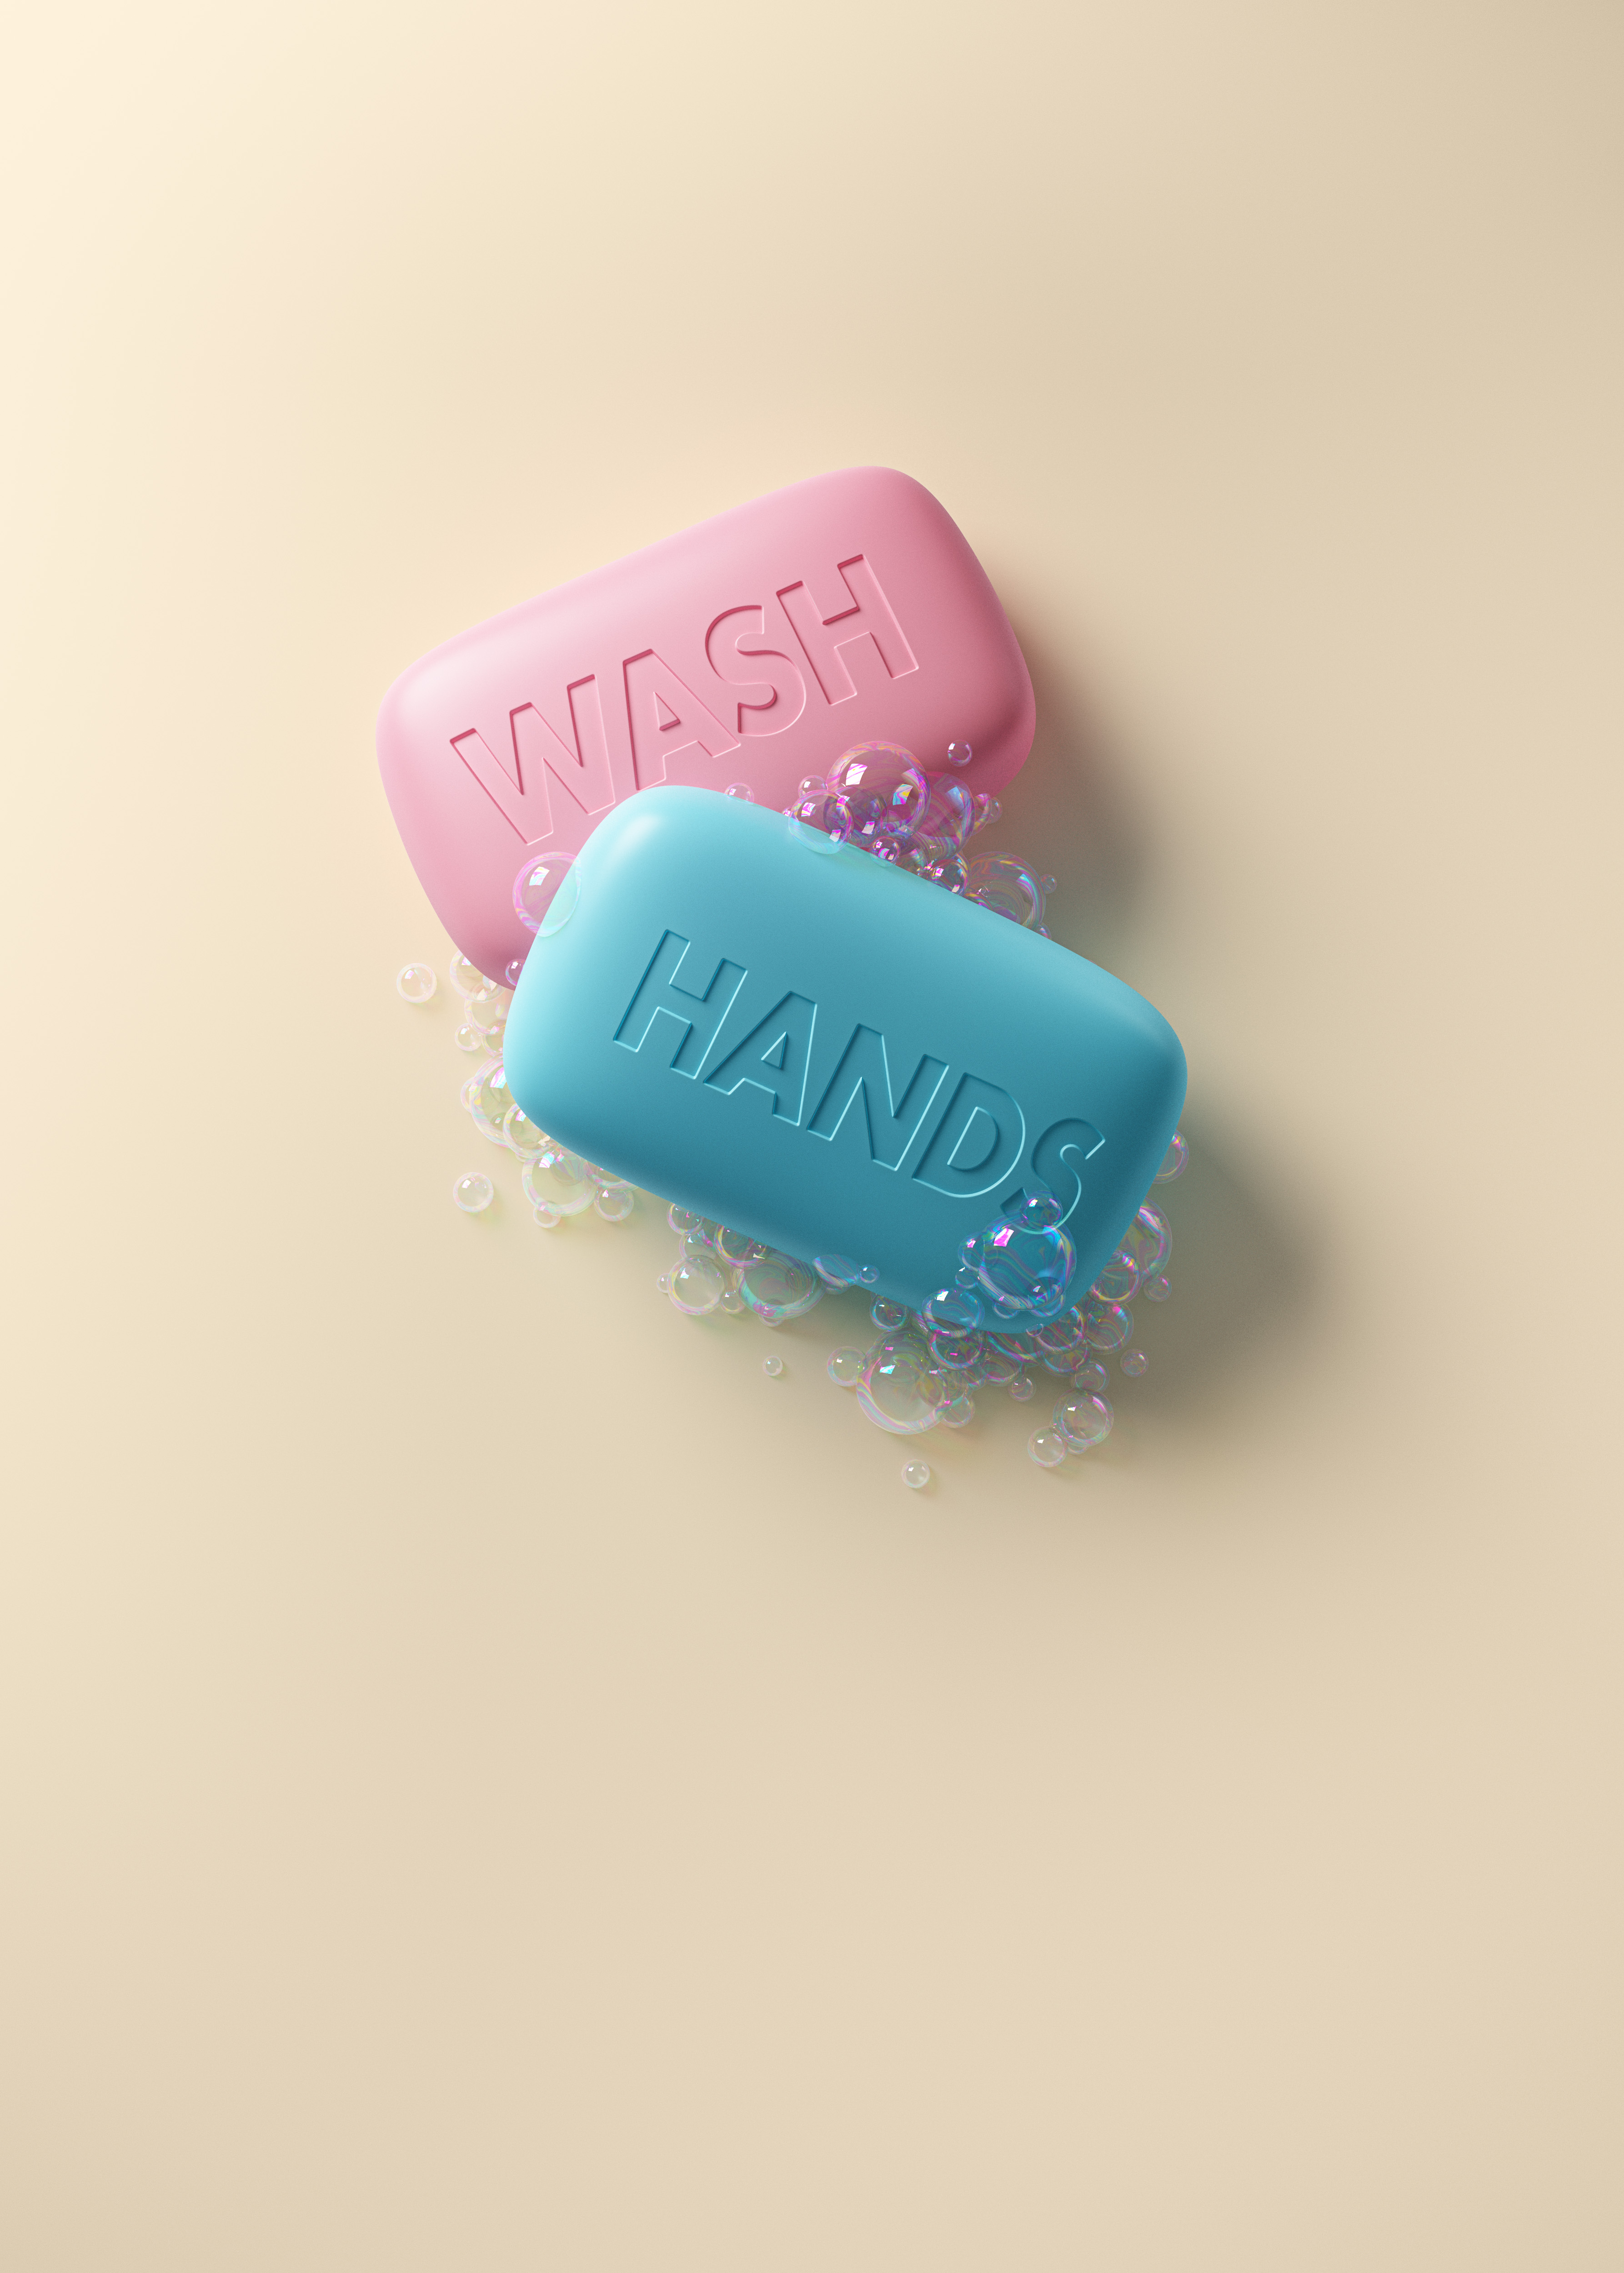 Two soaps with the text wash hands, and soap bubbles bubblor såpa tvål händer